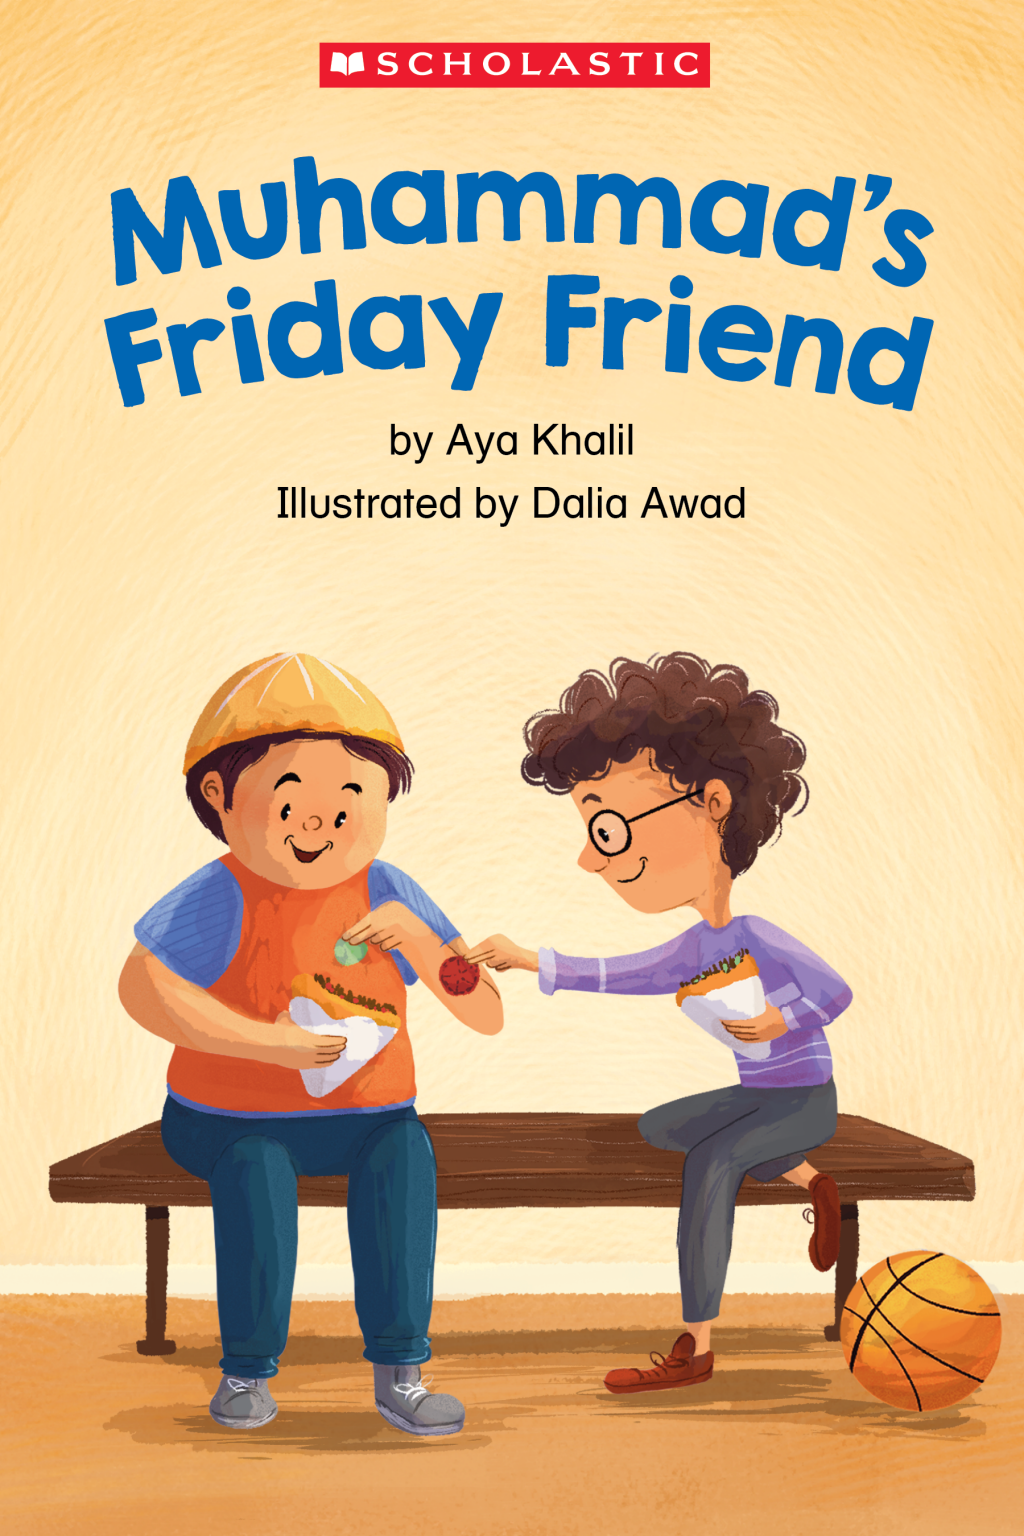 Muhammad's Friday Friend book cover